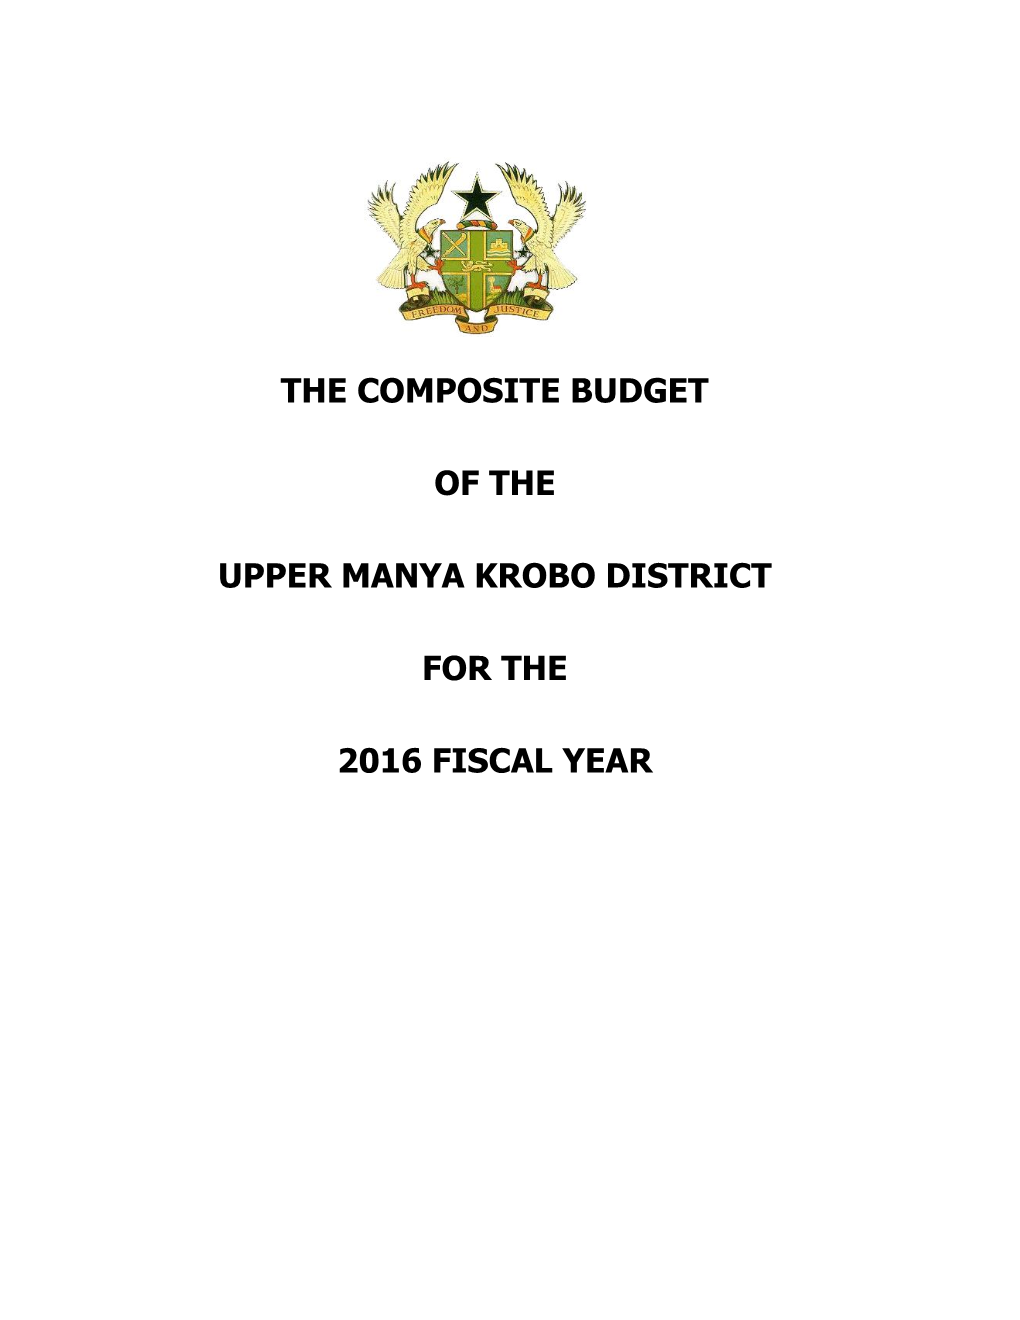 The Composite Budget of the Upper Manya Krobo District for the 2016